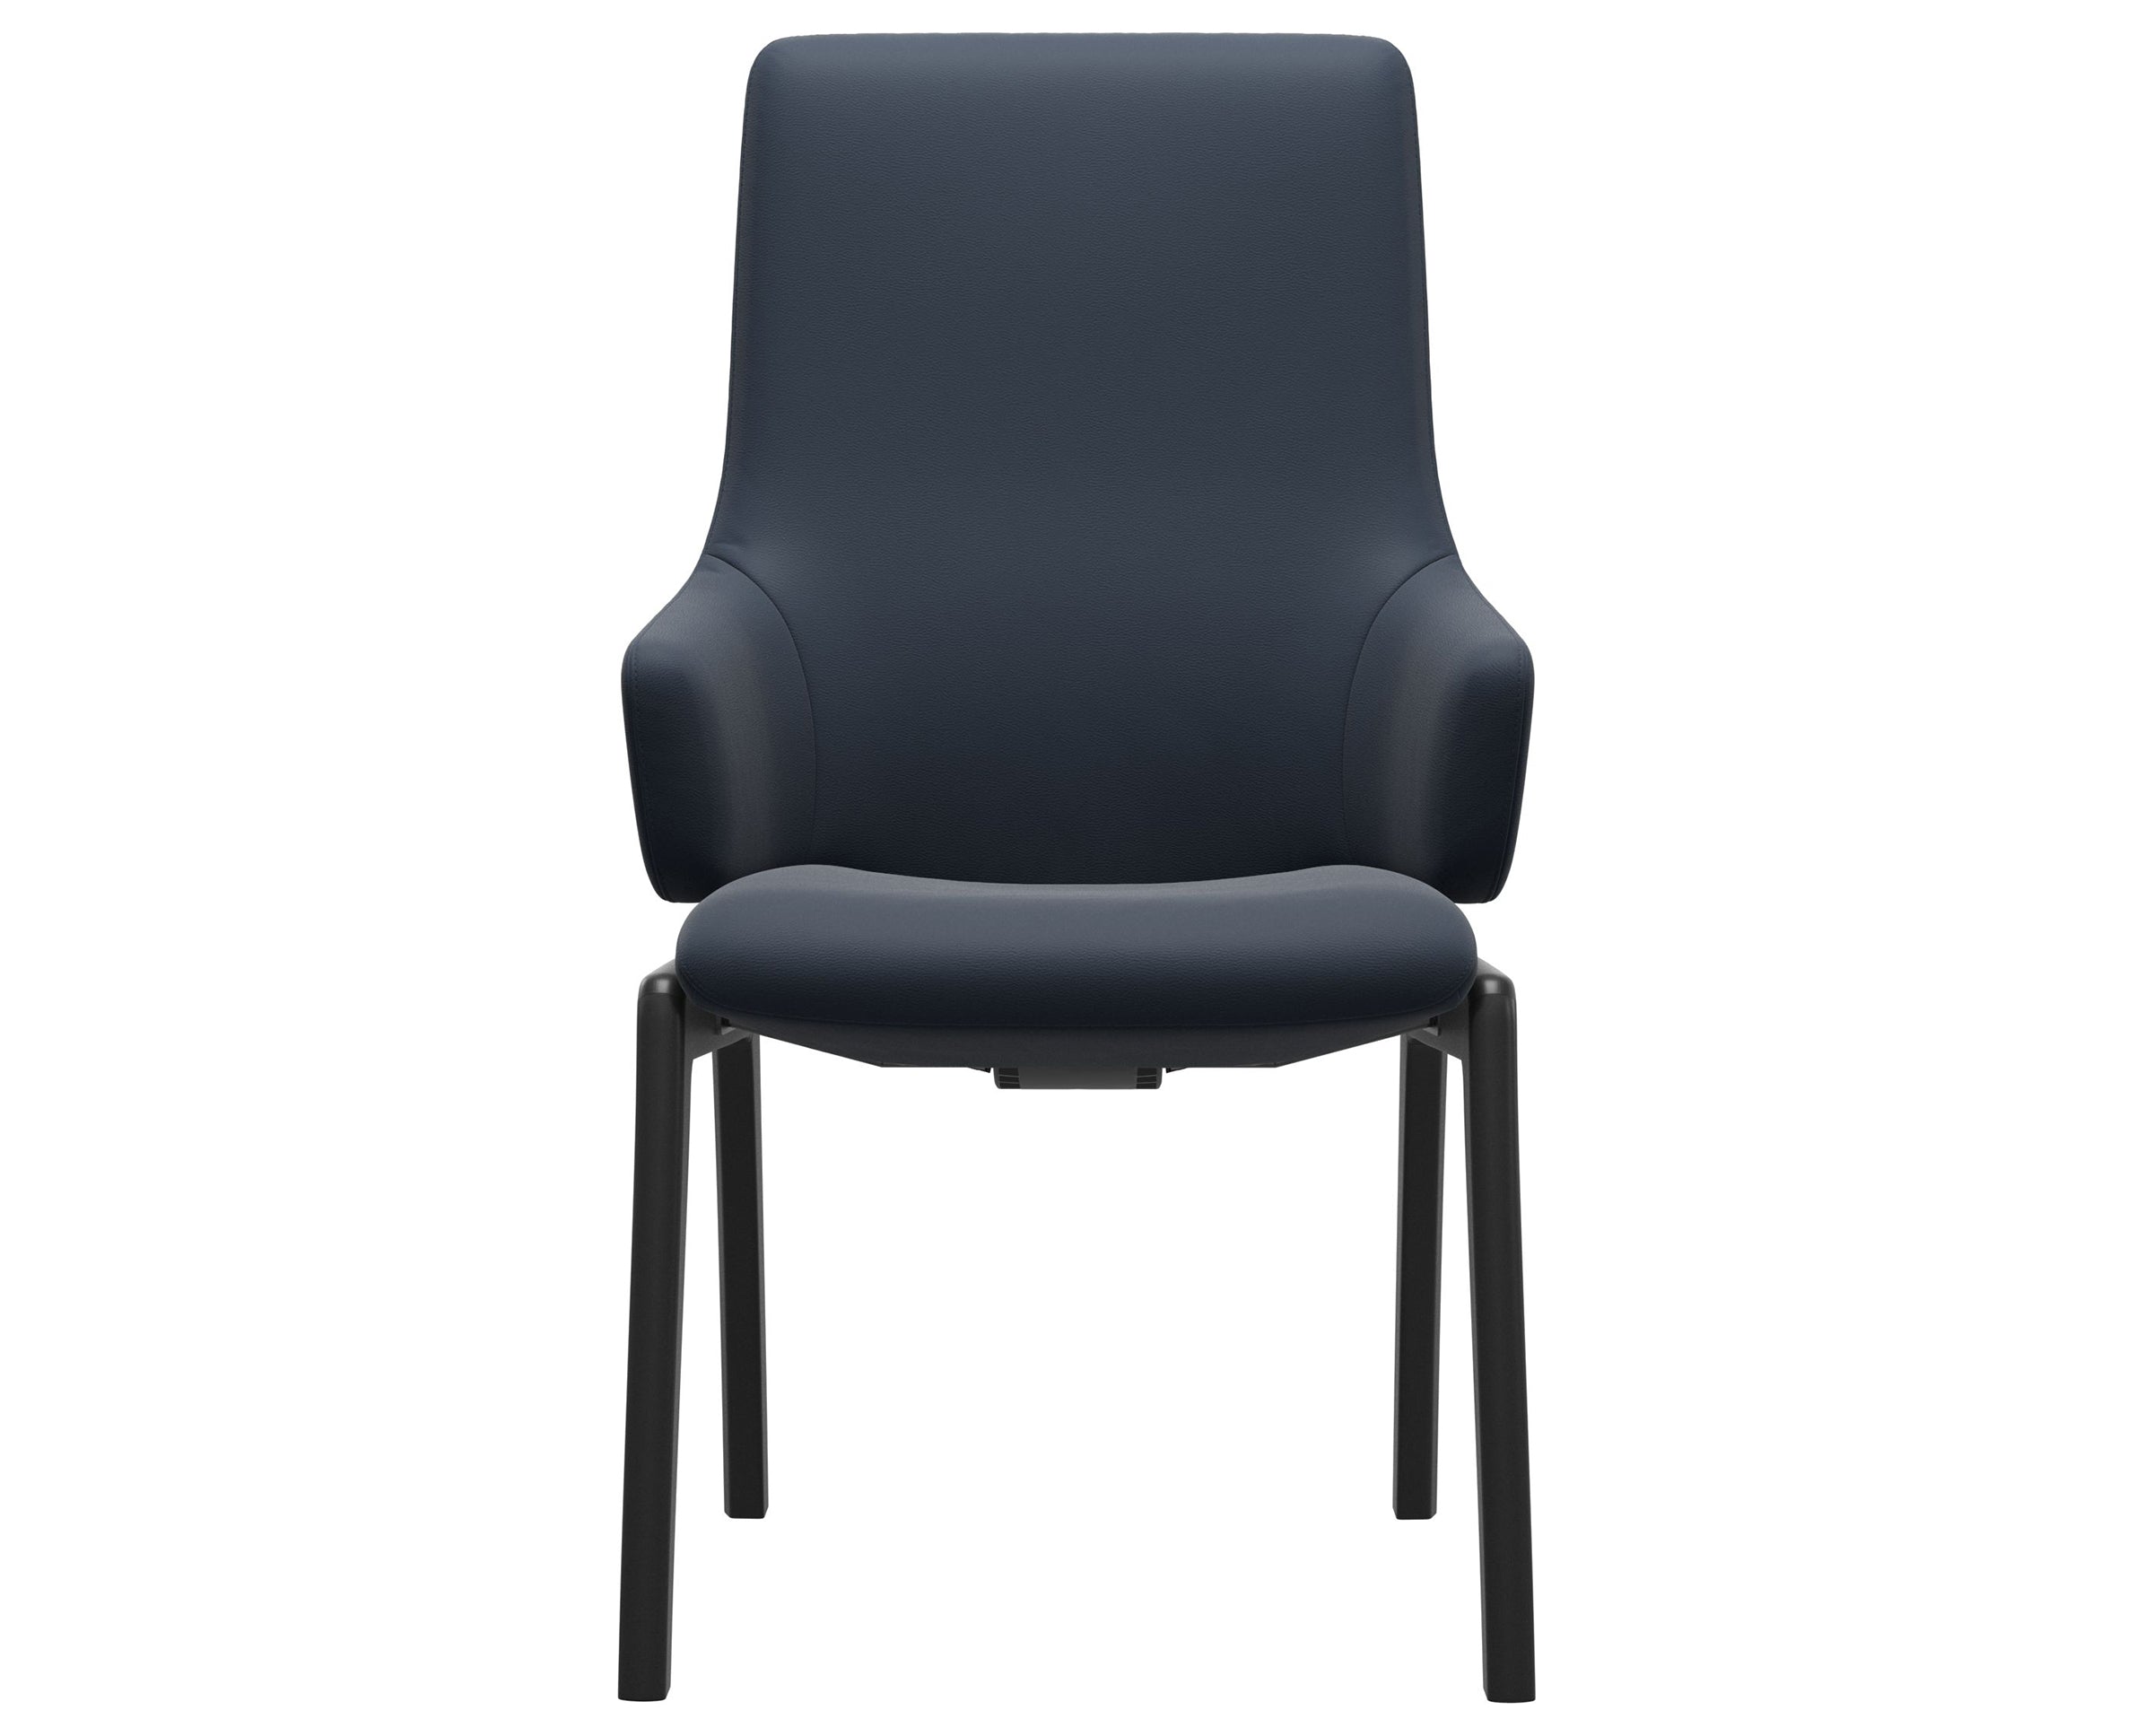 Paloma Leather Oxford Blue and Black Base | Stressless Laurel High Back D100 Dining Chair w/Arms | Valley Ridge Furniture